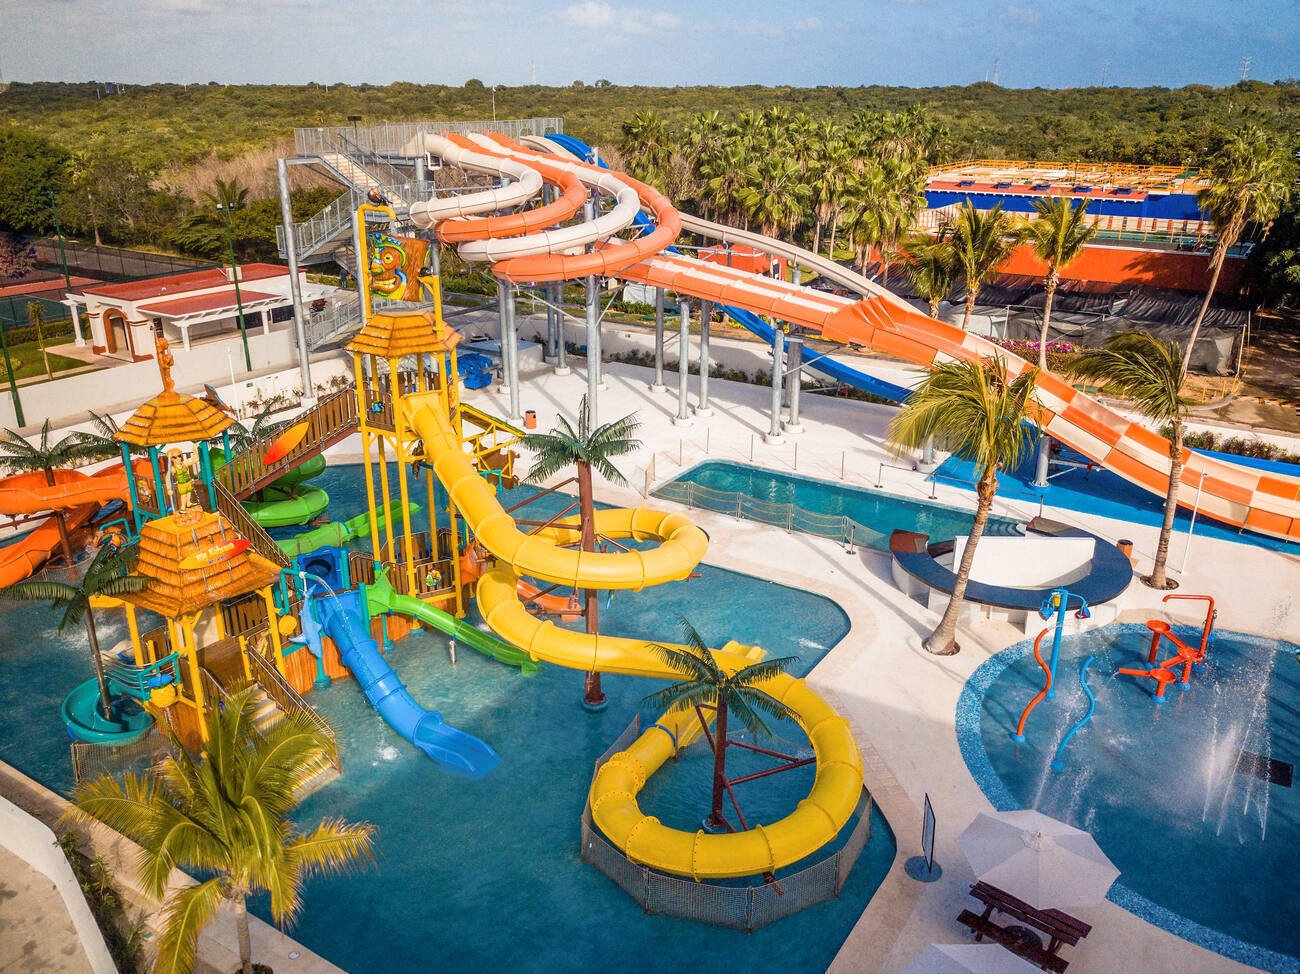 View of waterpark and different waterslides